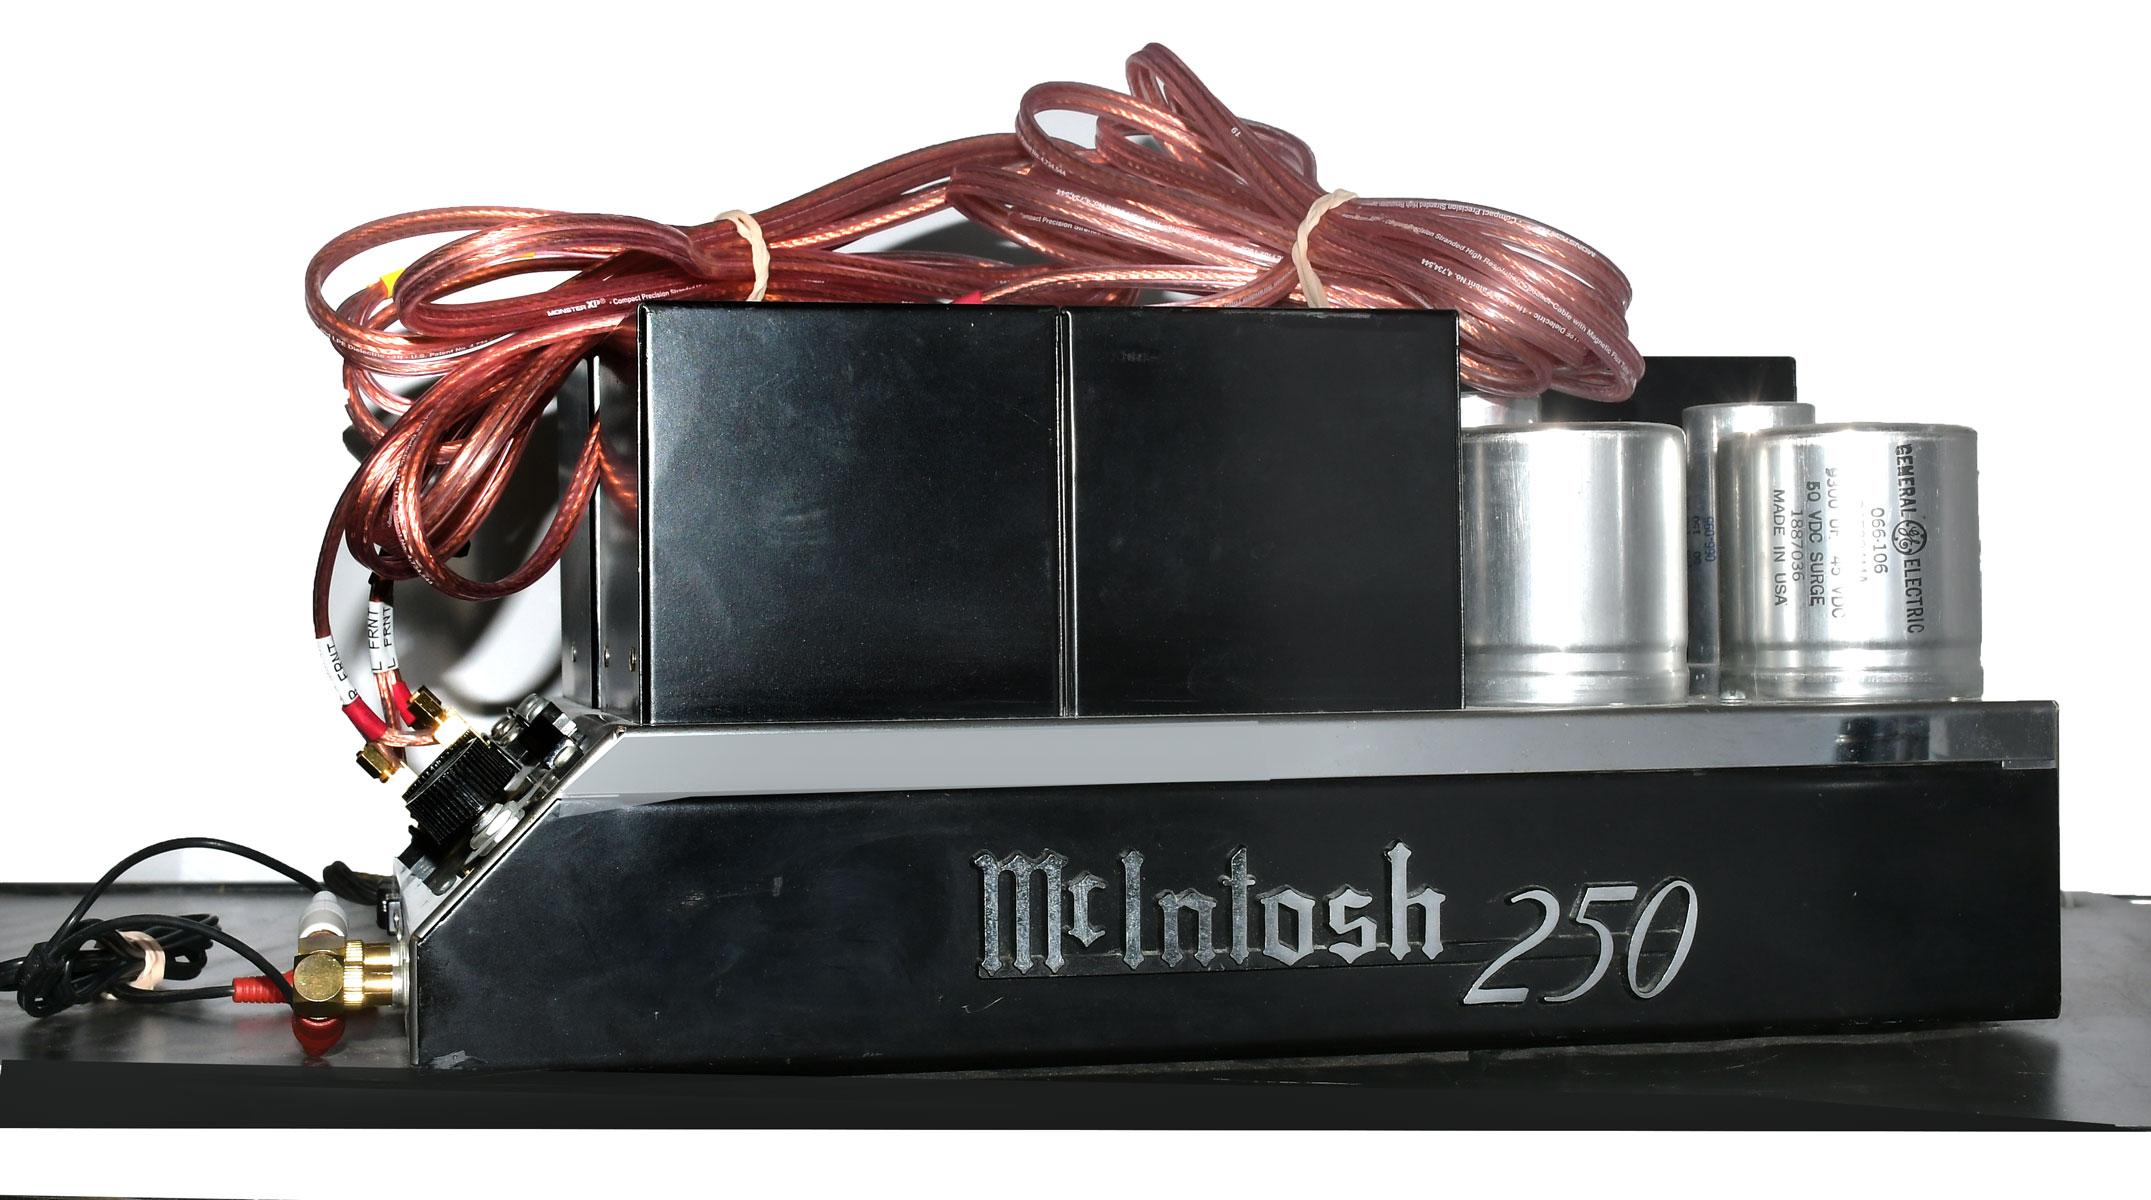 MCINTOSH 250 AMPLIFIER From the 275163